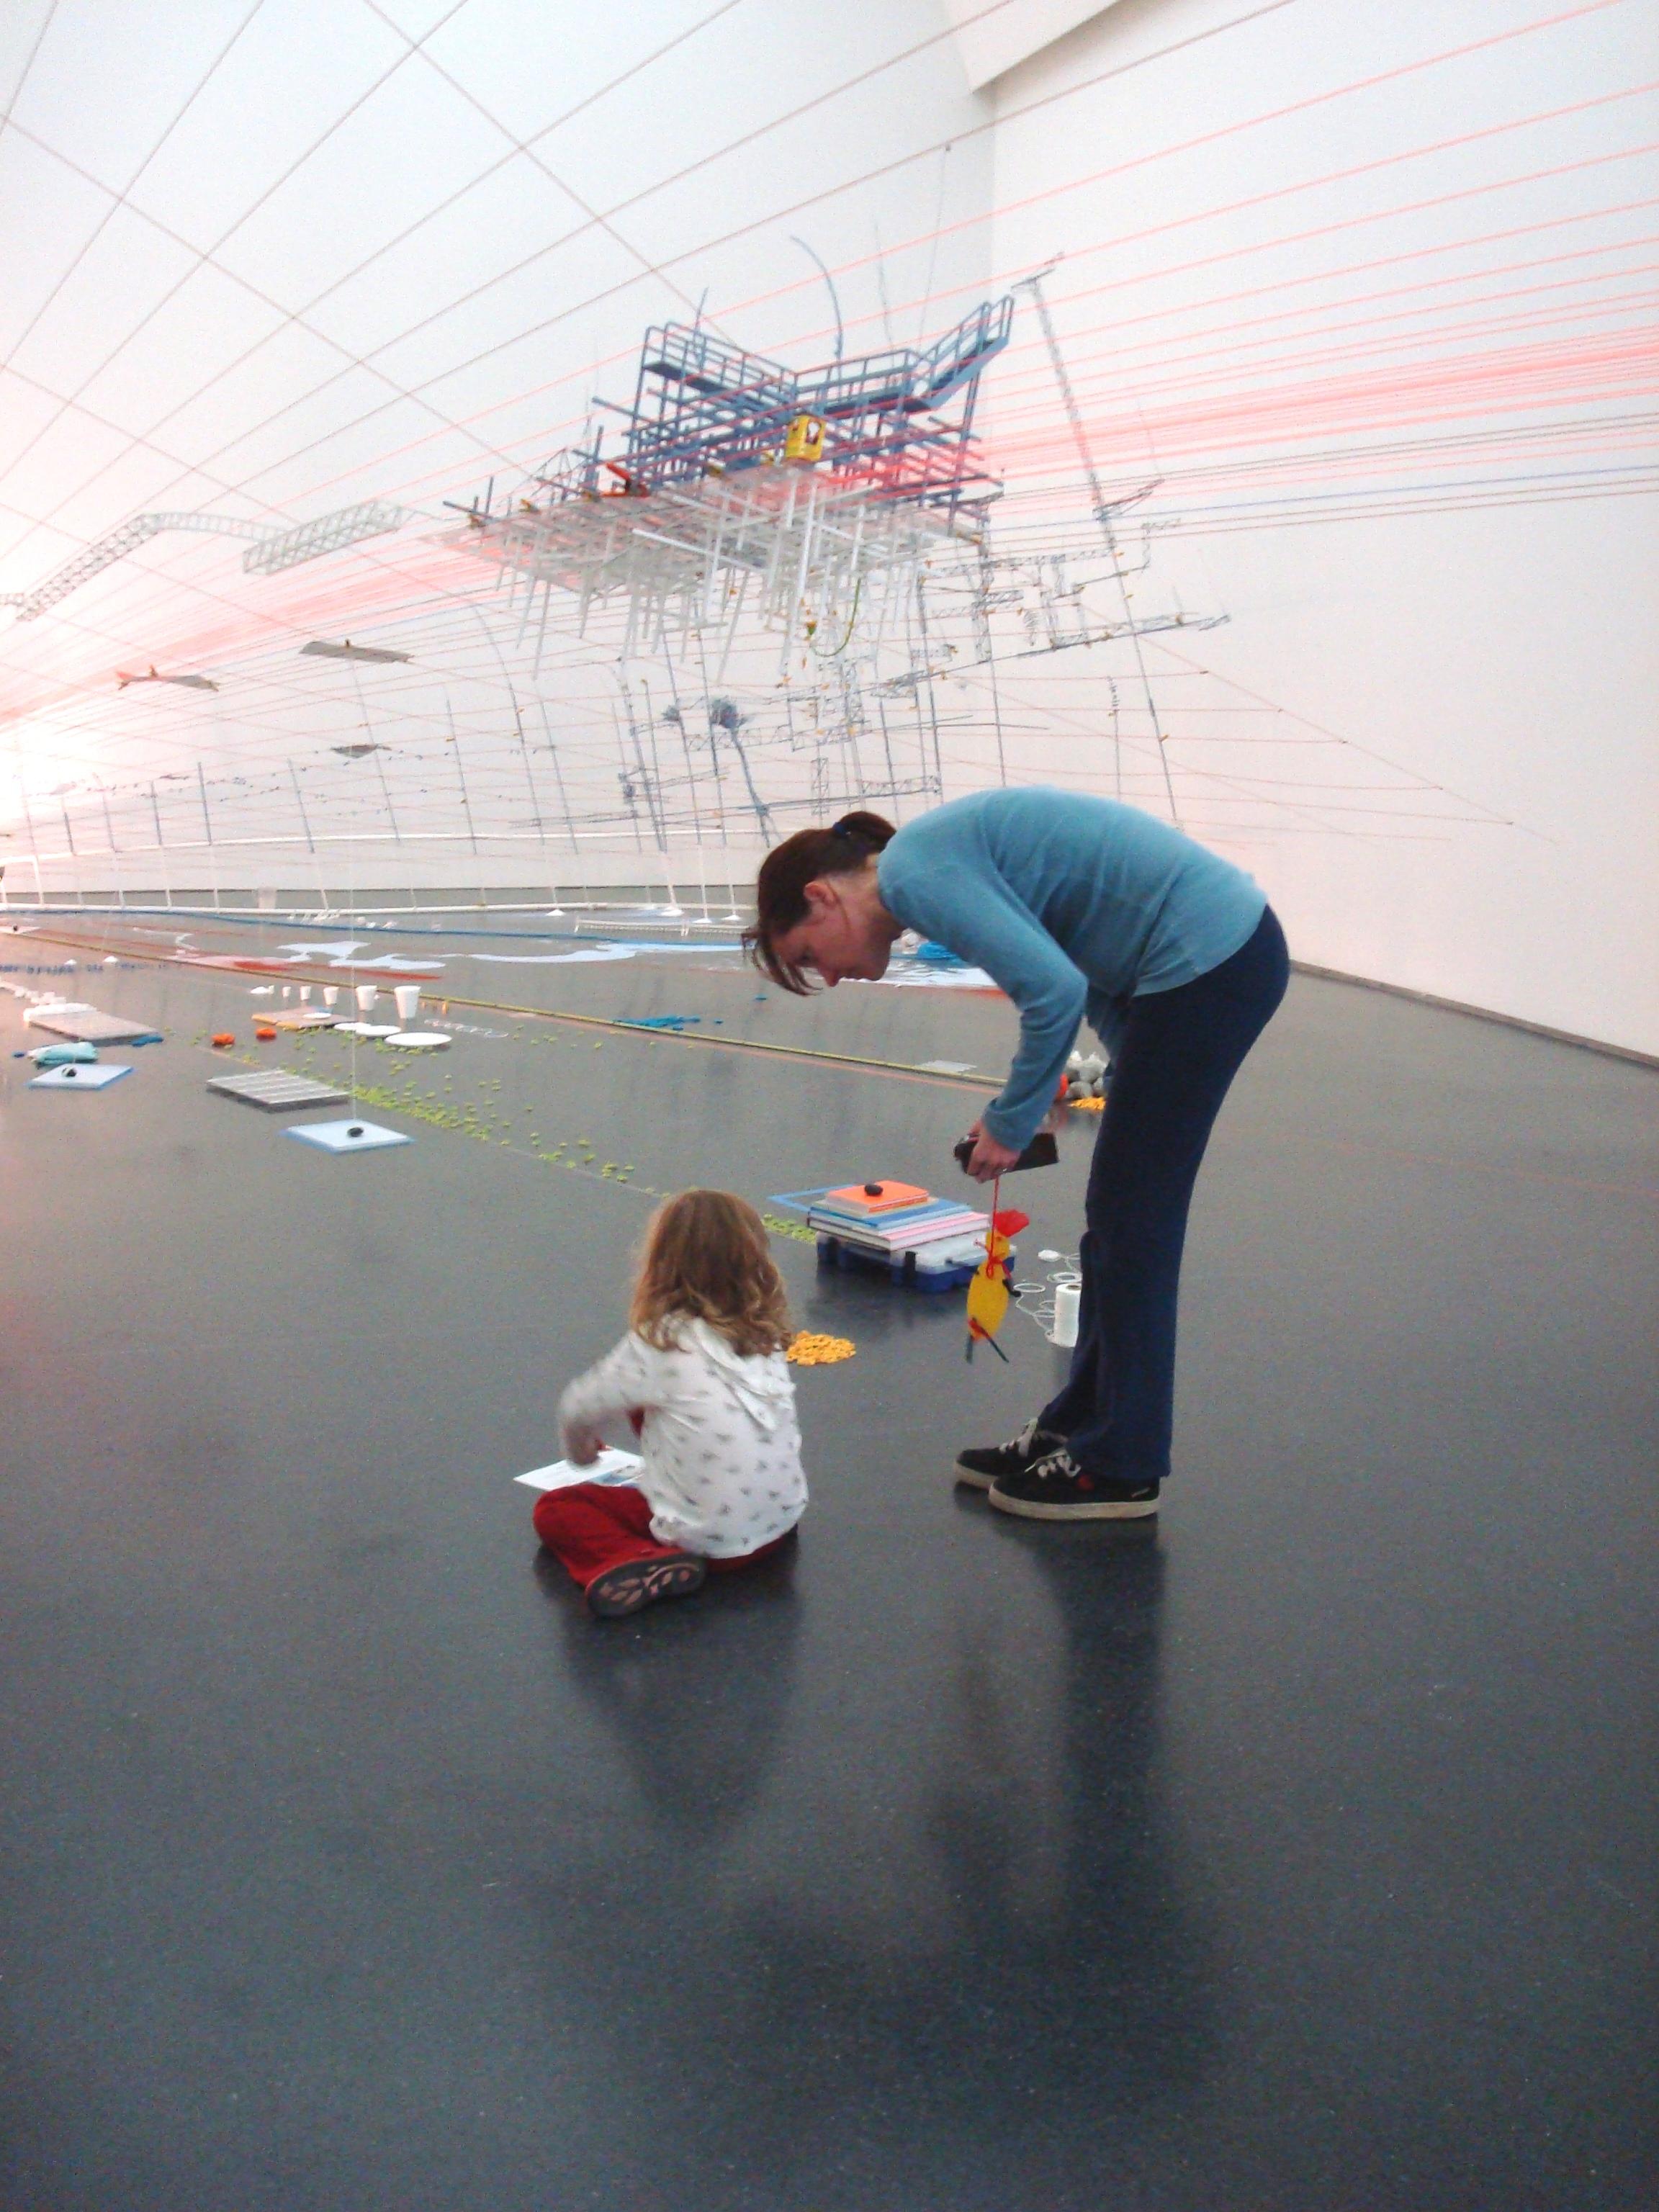 A mother bends over watching her daughter draw underneath an art installation of string stretching from floor to ceiling with books and paper on the floor.